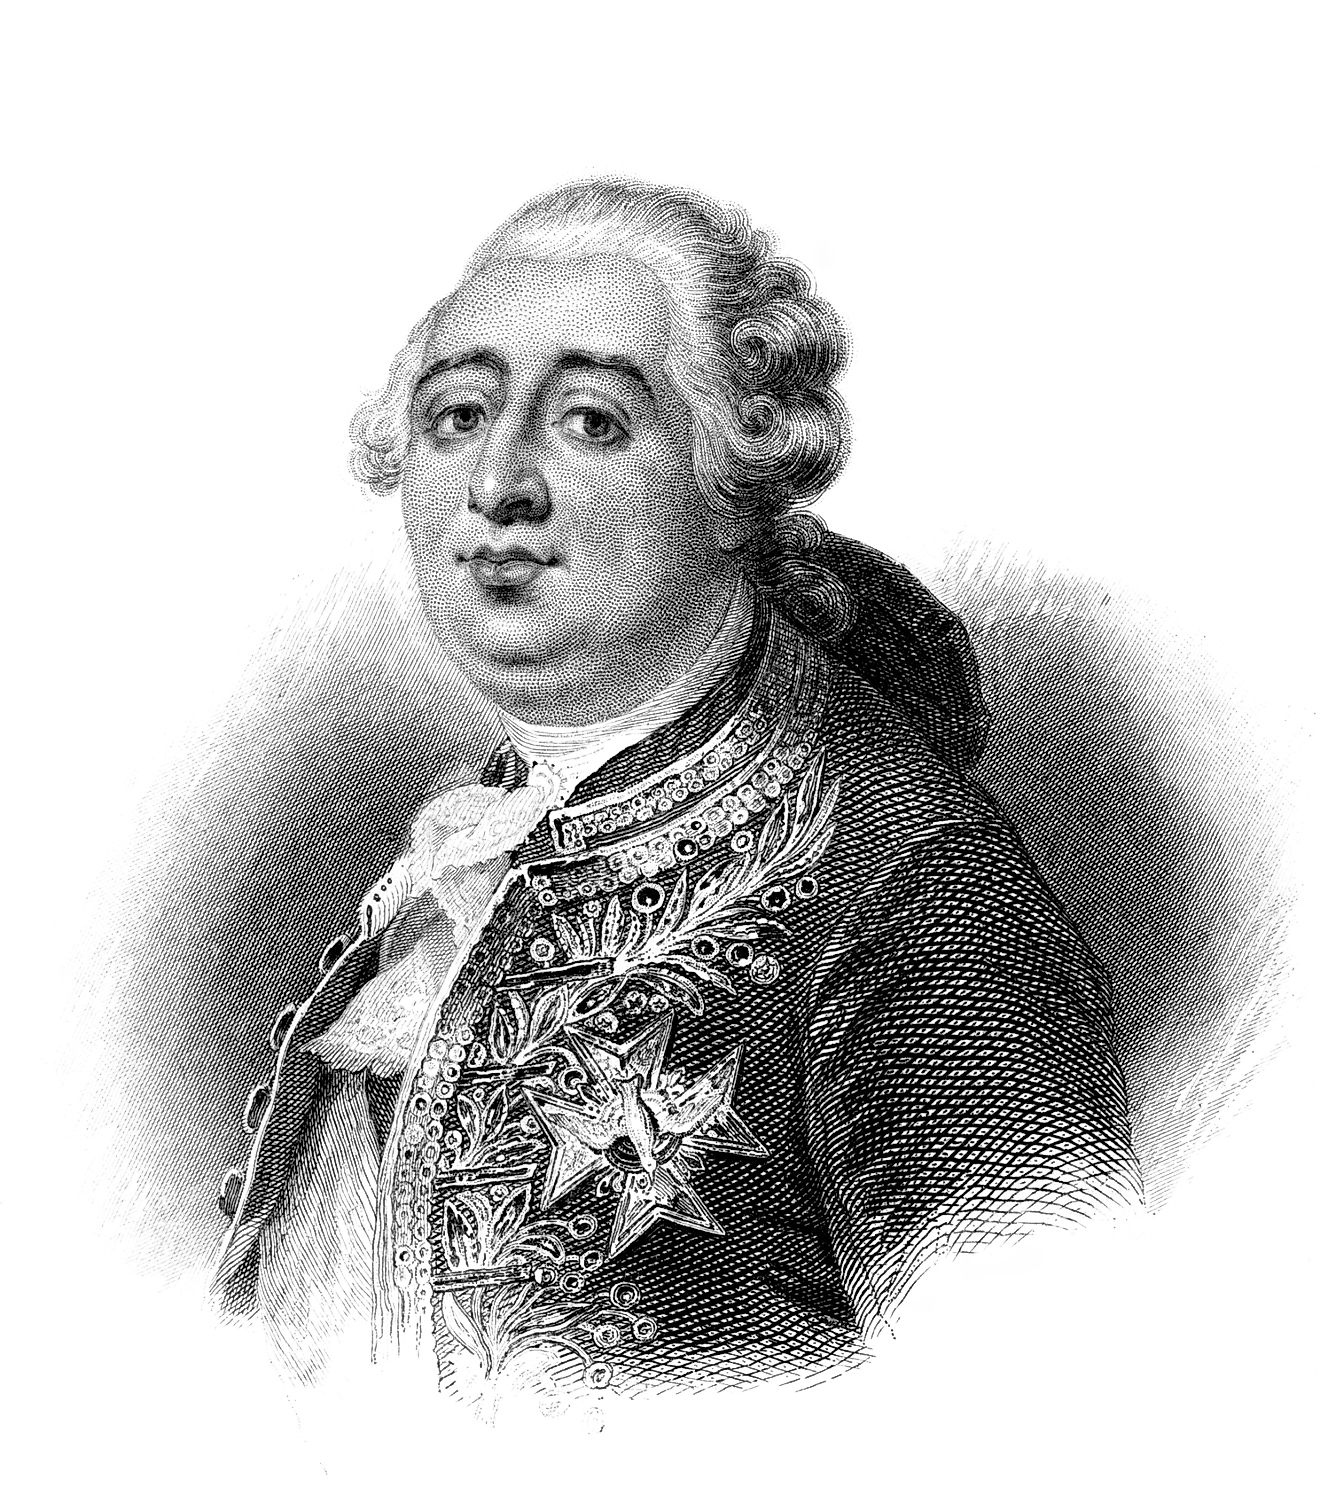 Louis XVI was the last of a series of consecutive leaders that ruled France as monarchs from the 5th Century AD until 1792.